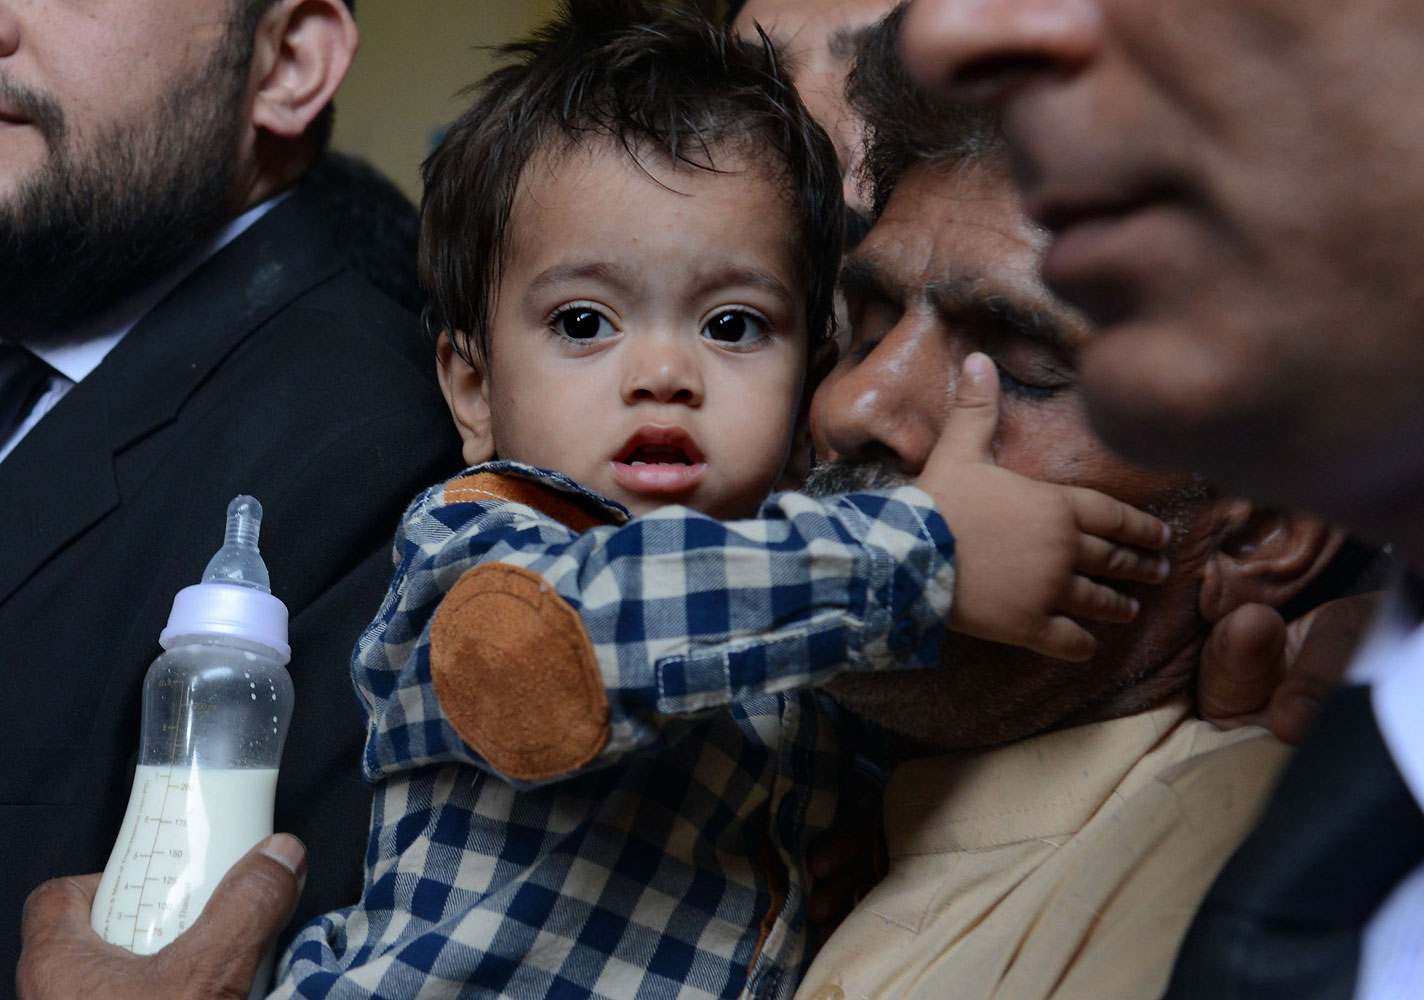 Nine month Pakistan toddler Mohammad Musa is held by his grandfather Muhammad Yasin for a court hearing in Lahore on April 12, 2014. (Arif Ali—AFP/Getty Images)